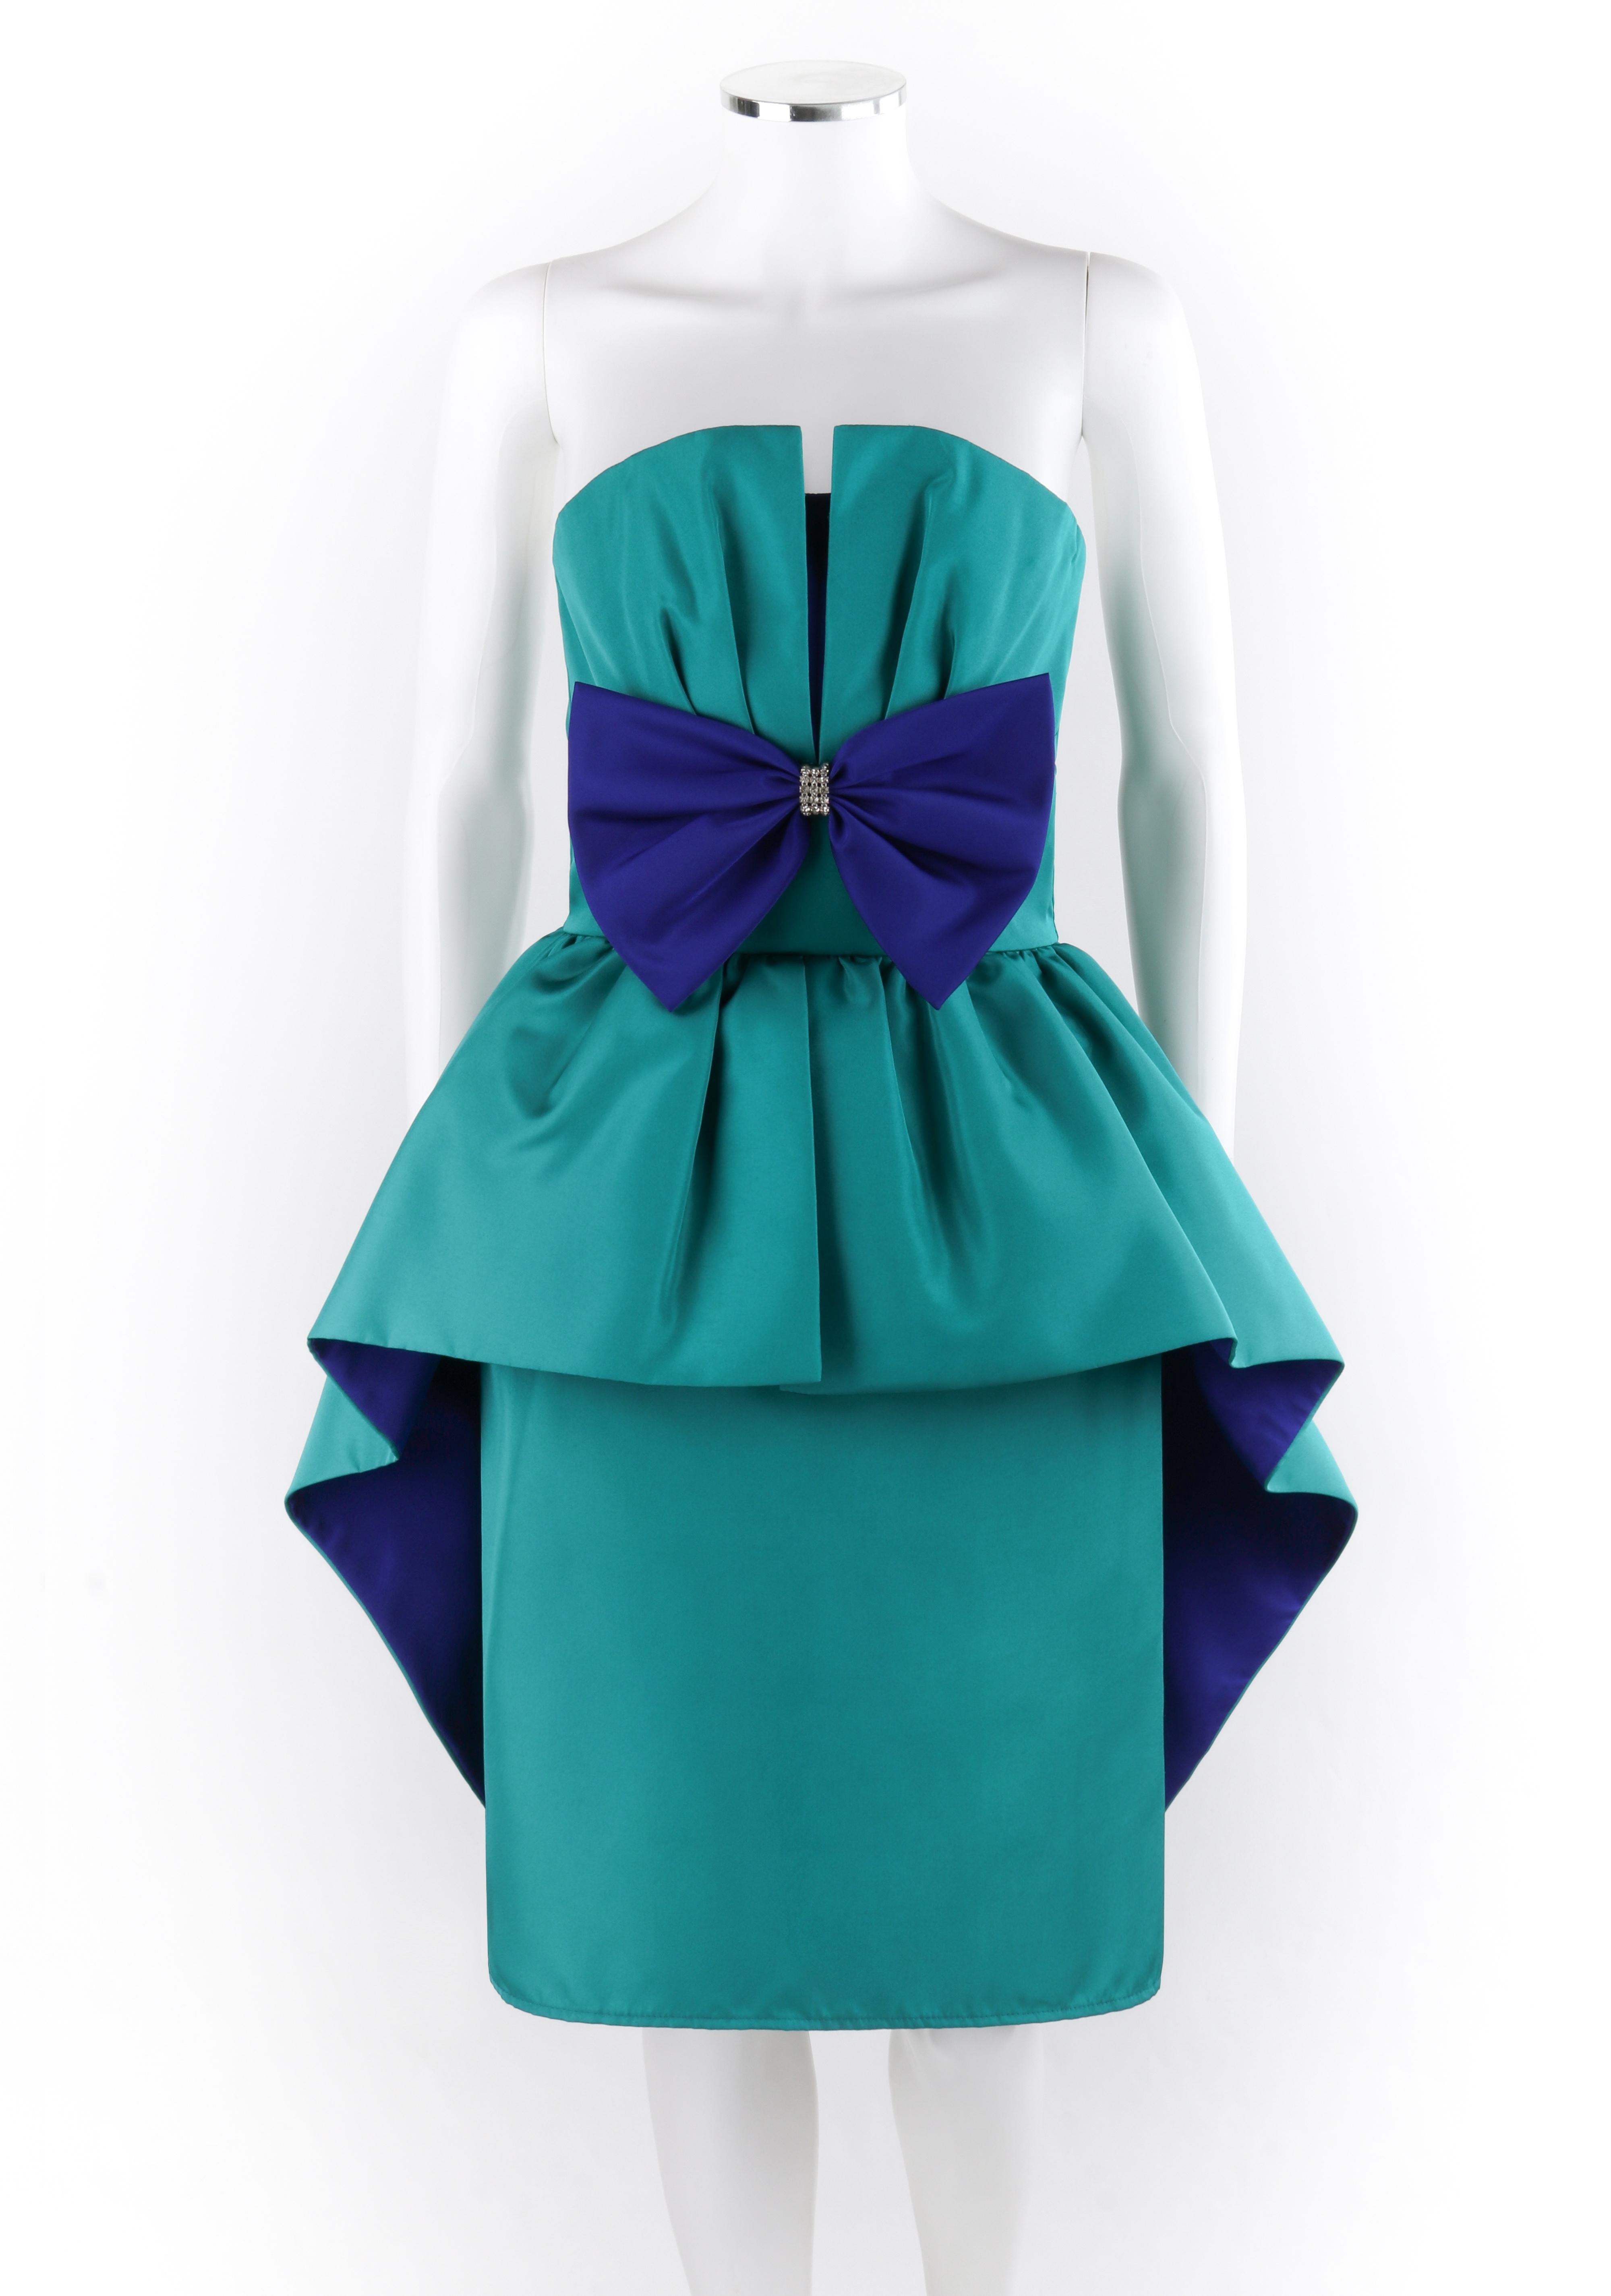 HUEY WALTZER c.1980’s Teal Purple Dual Tone Pleated Peplum Strapless Party Dress
Circa: 1980’s
Label(s): Huey Waltzer for Darcy
Designer: Huey Waltzer
Style: Sleeveless dress
Color(s): Teal and purple
Lined: Partial
Unmarked Fabric Content (feel